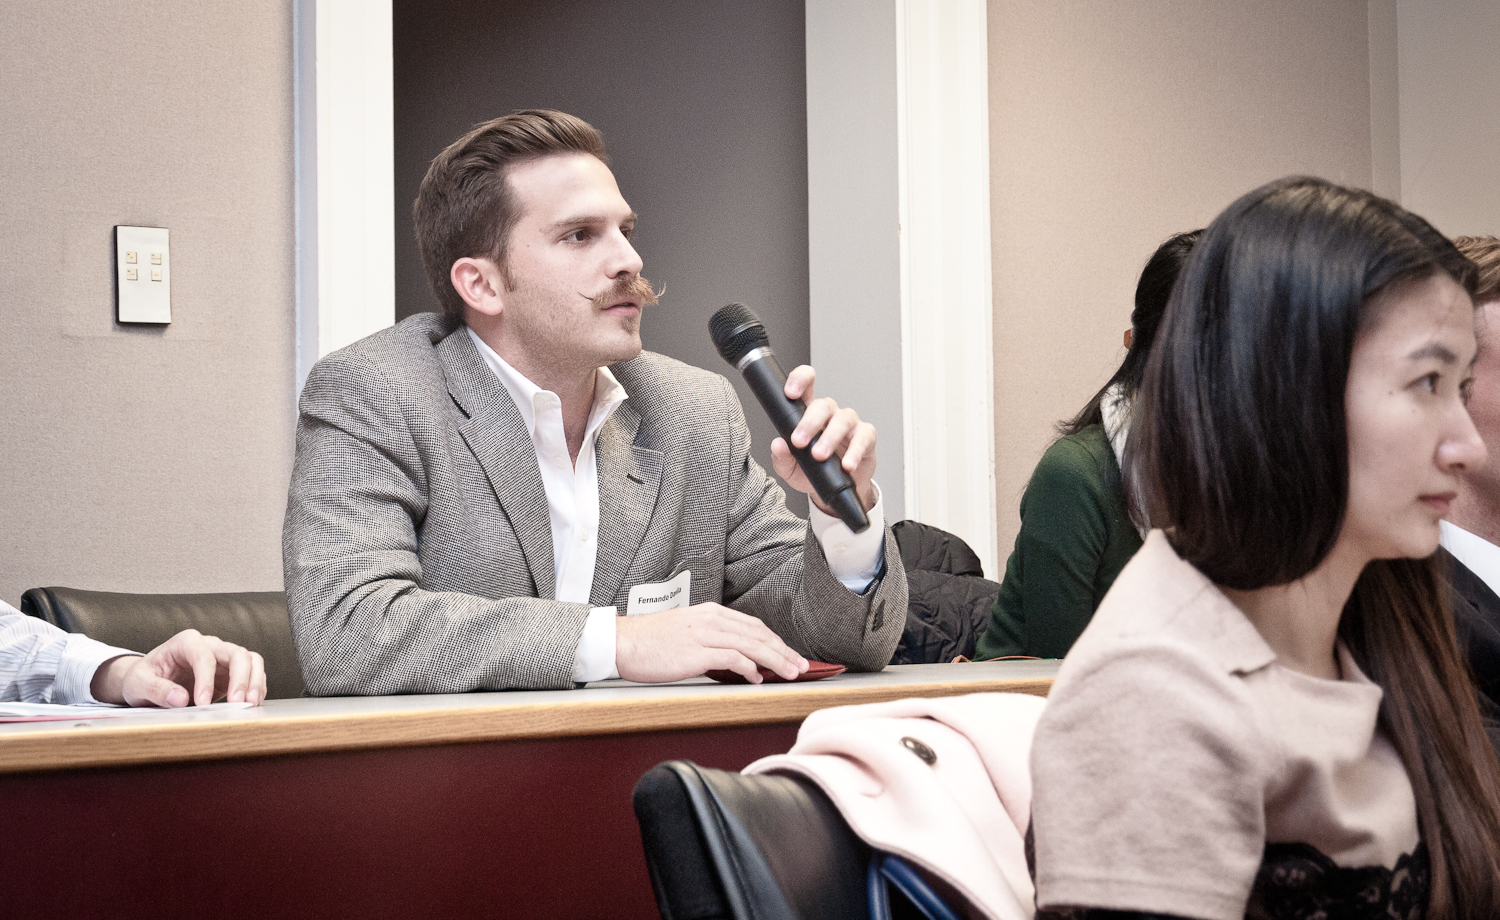 Darden student Fernando Davila (MBA '15 and current President of the Darden Latin American Student Association) asks a question during one of the  interactive conference sessions. 